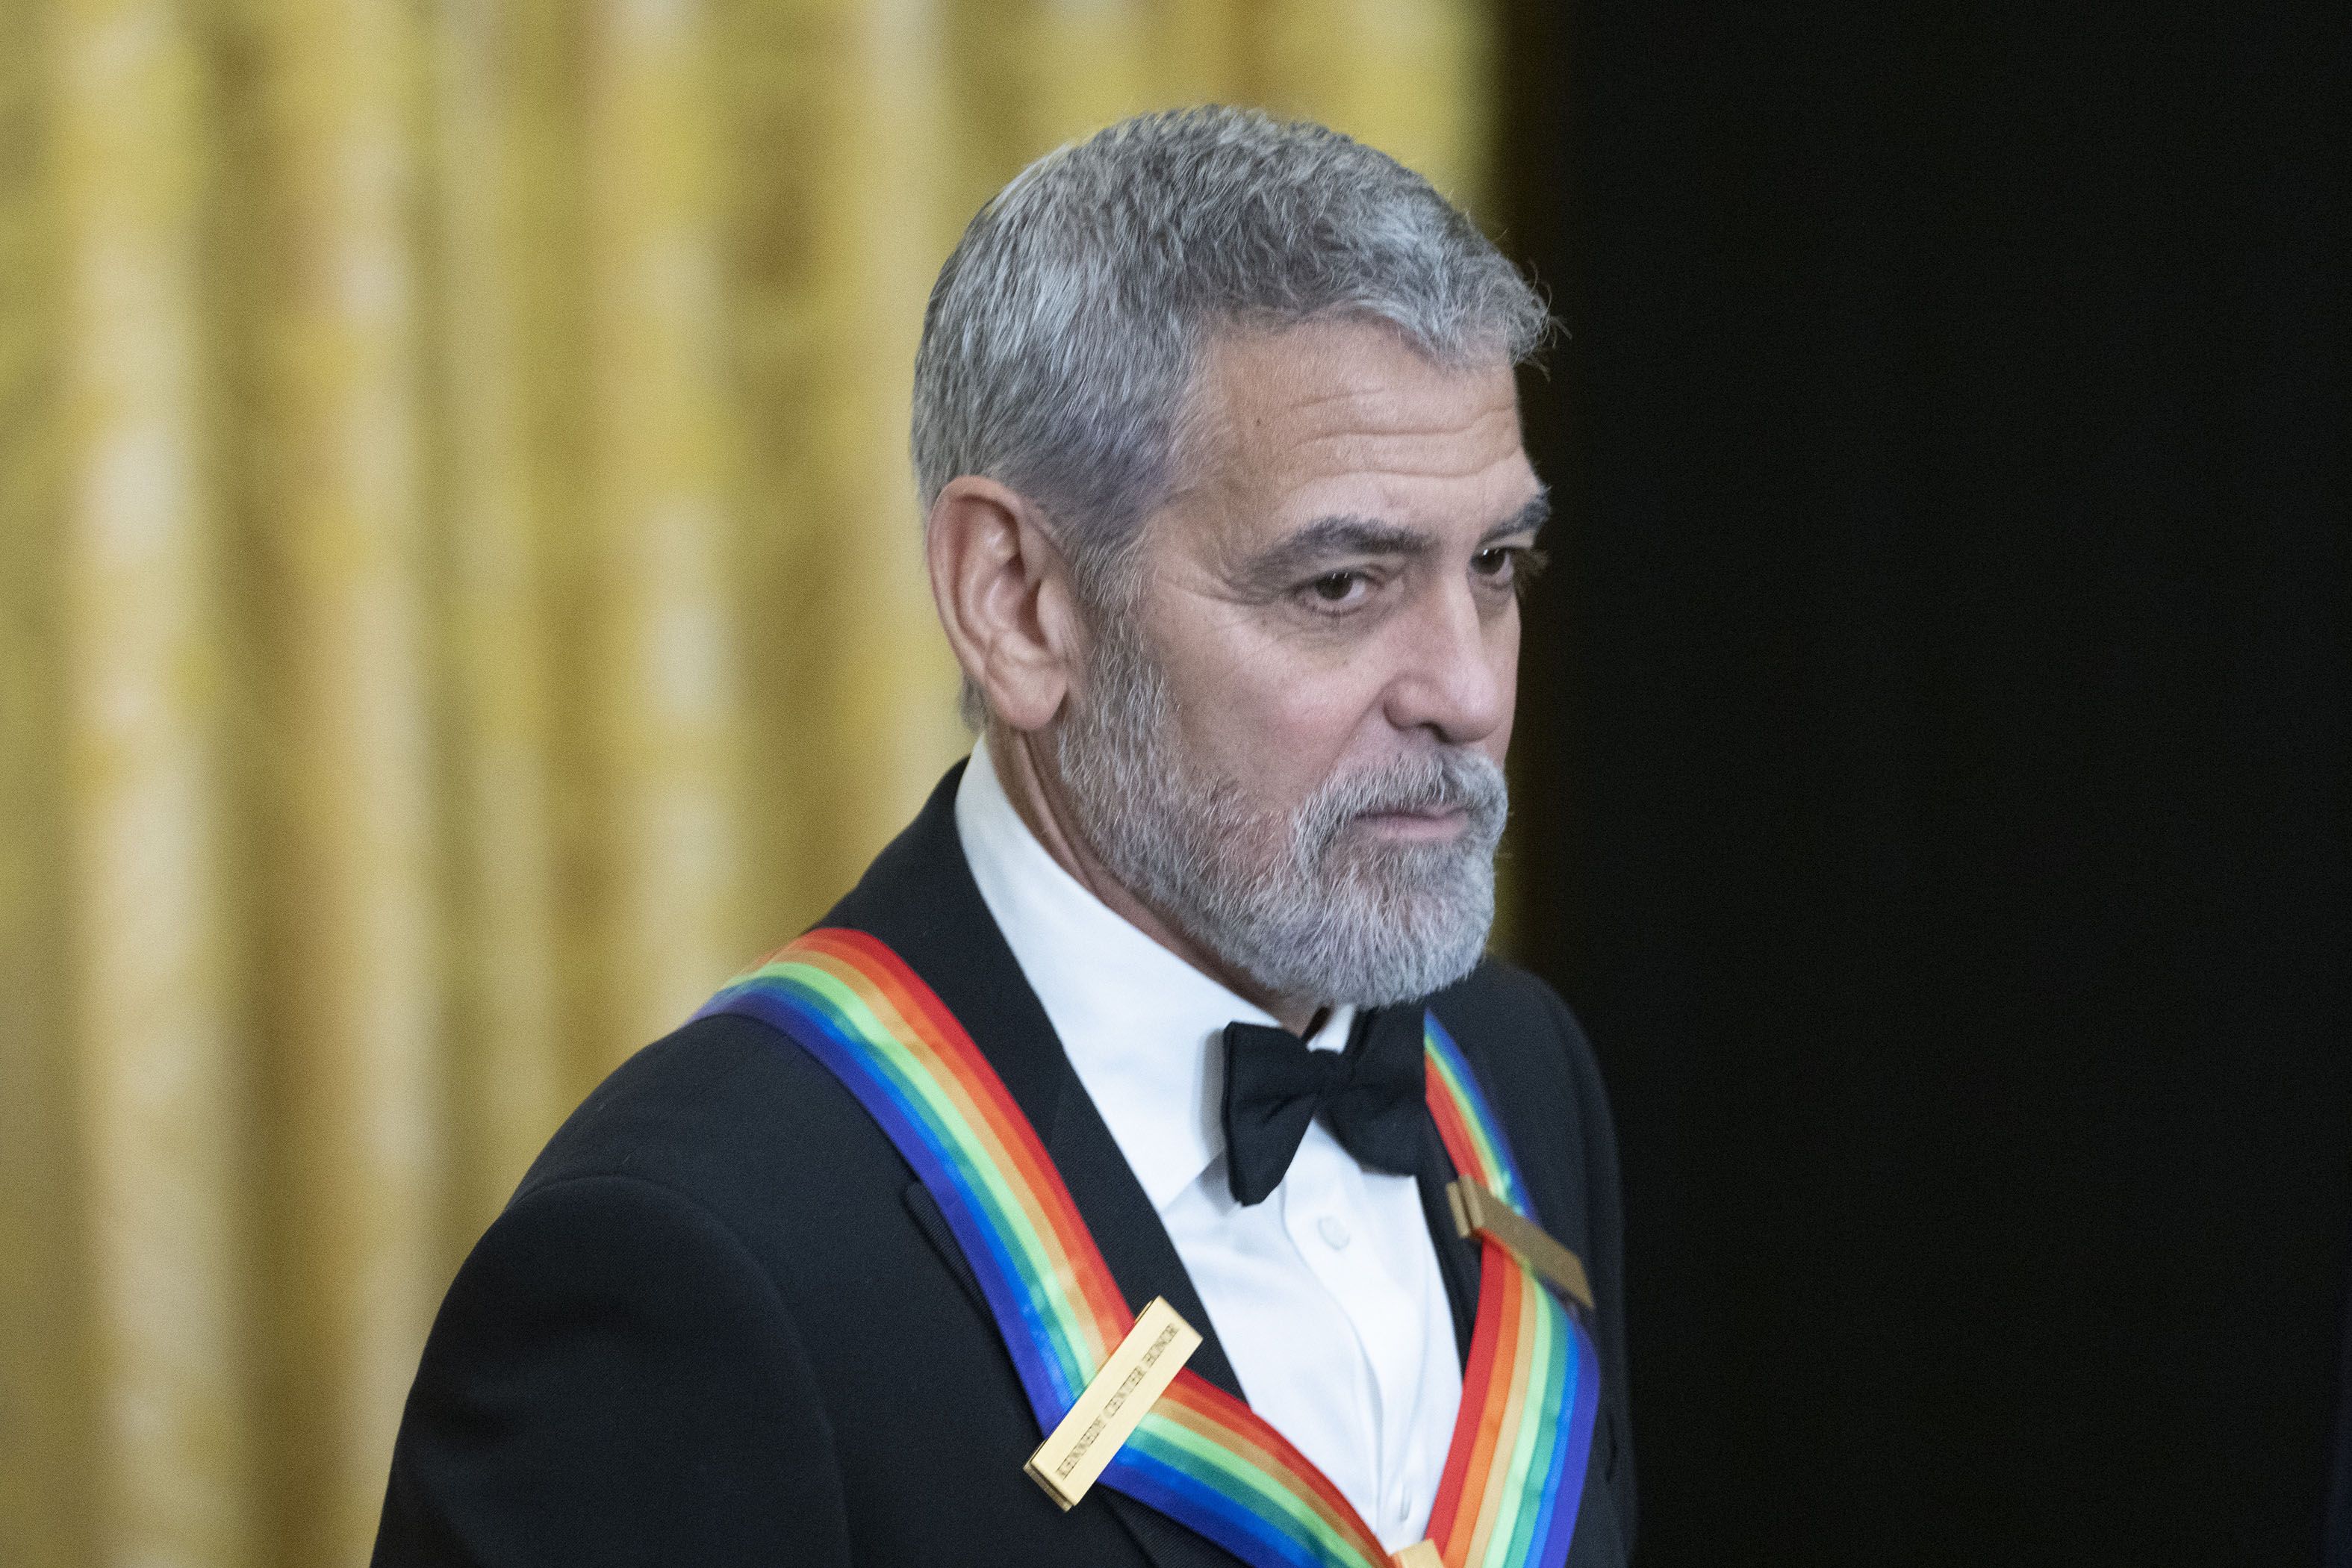 George Clooney at the 45th Annual Kennedy Center Honors